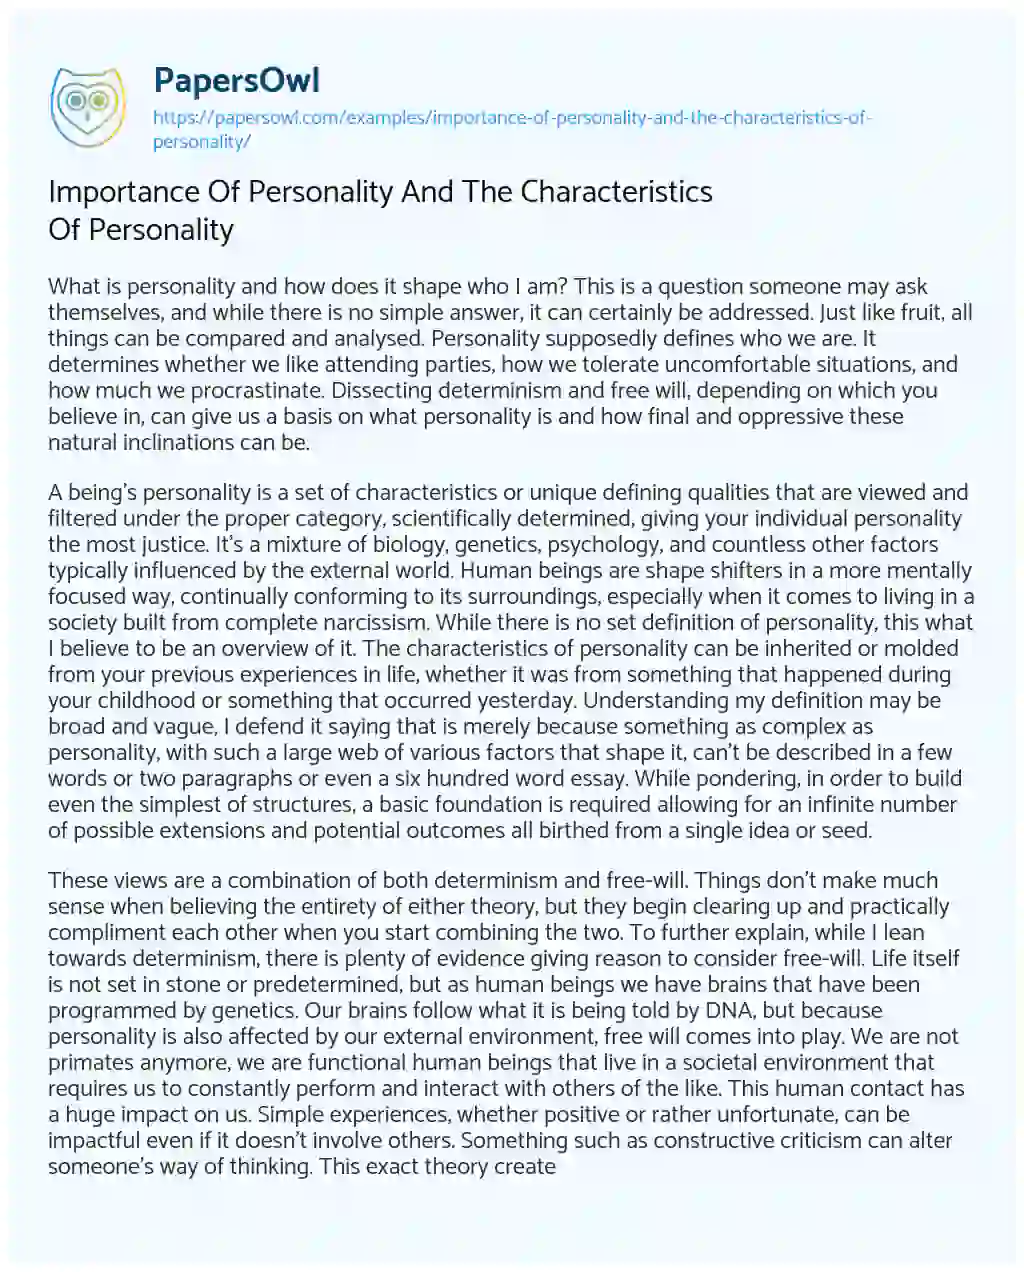 Essay on Importance of Personality and the Characteristics of Personality